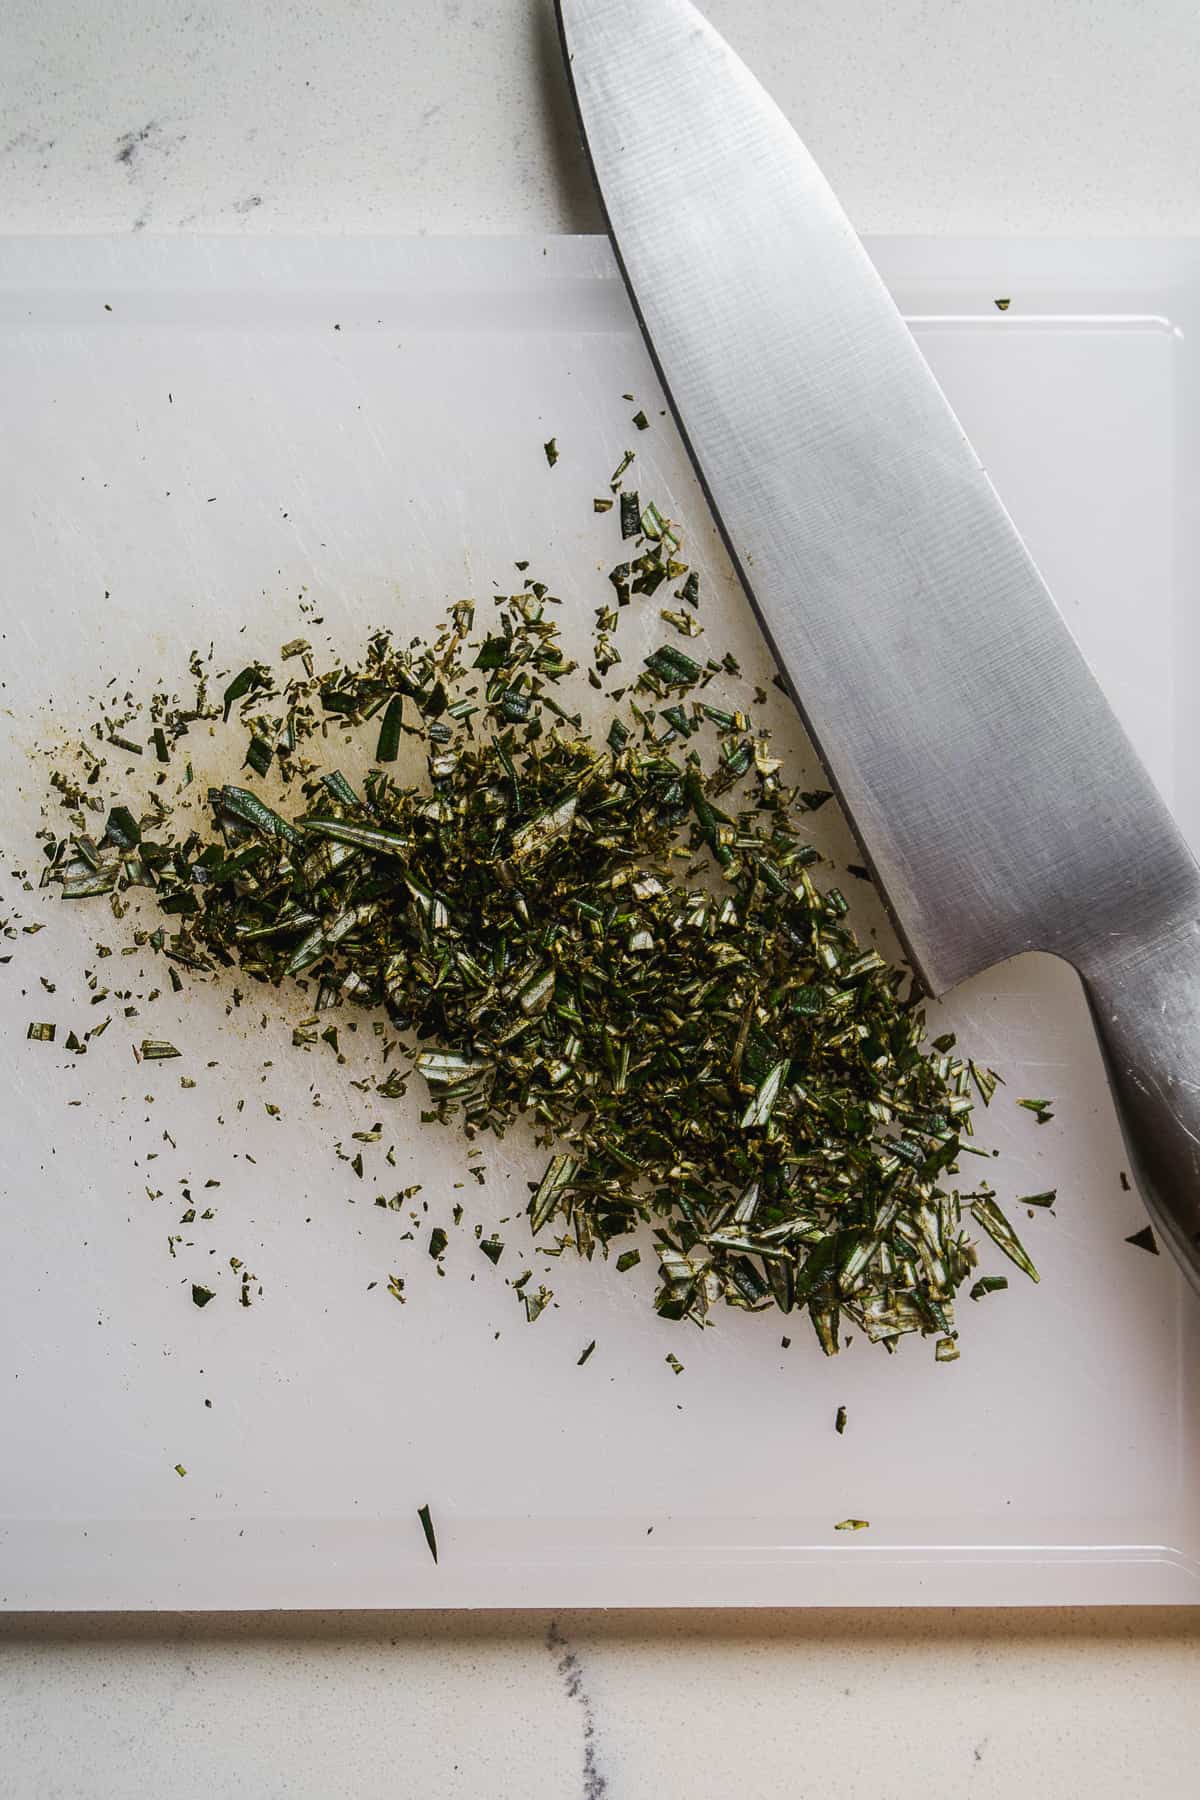 Rosemary cut into fine pieces on a cutting board.